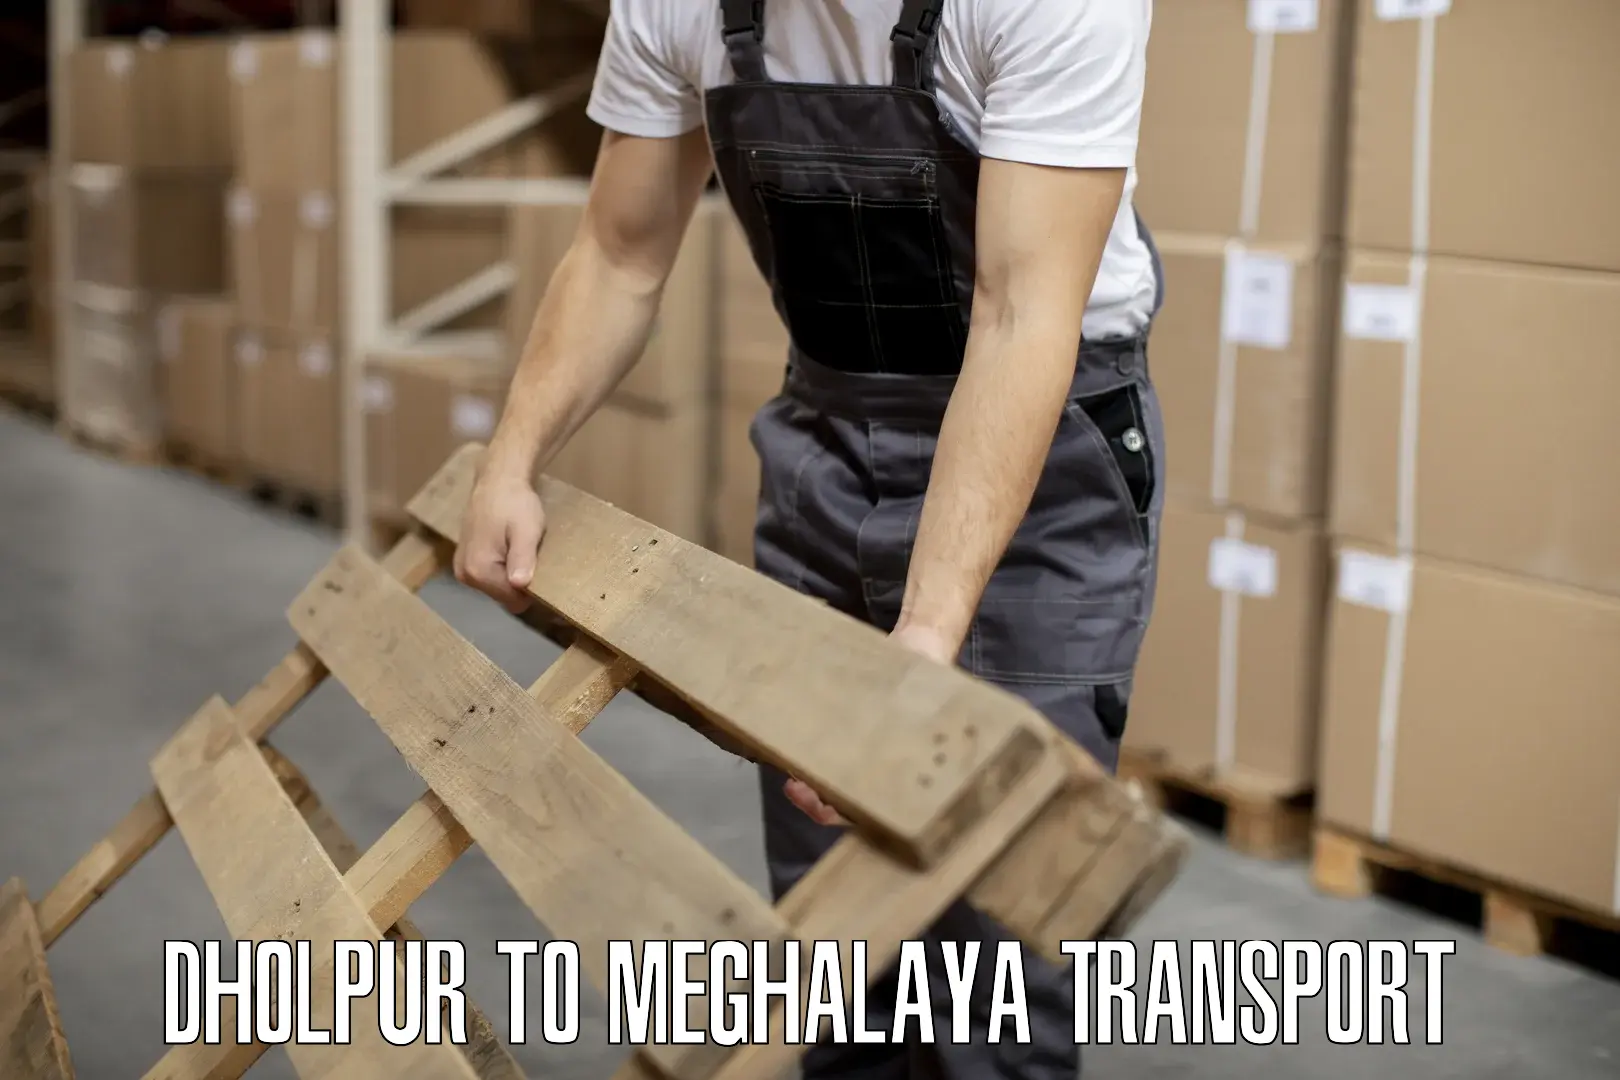 Delivery service Dholpur to Meghalaya